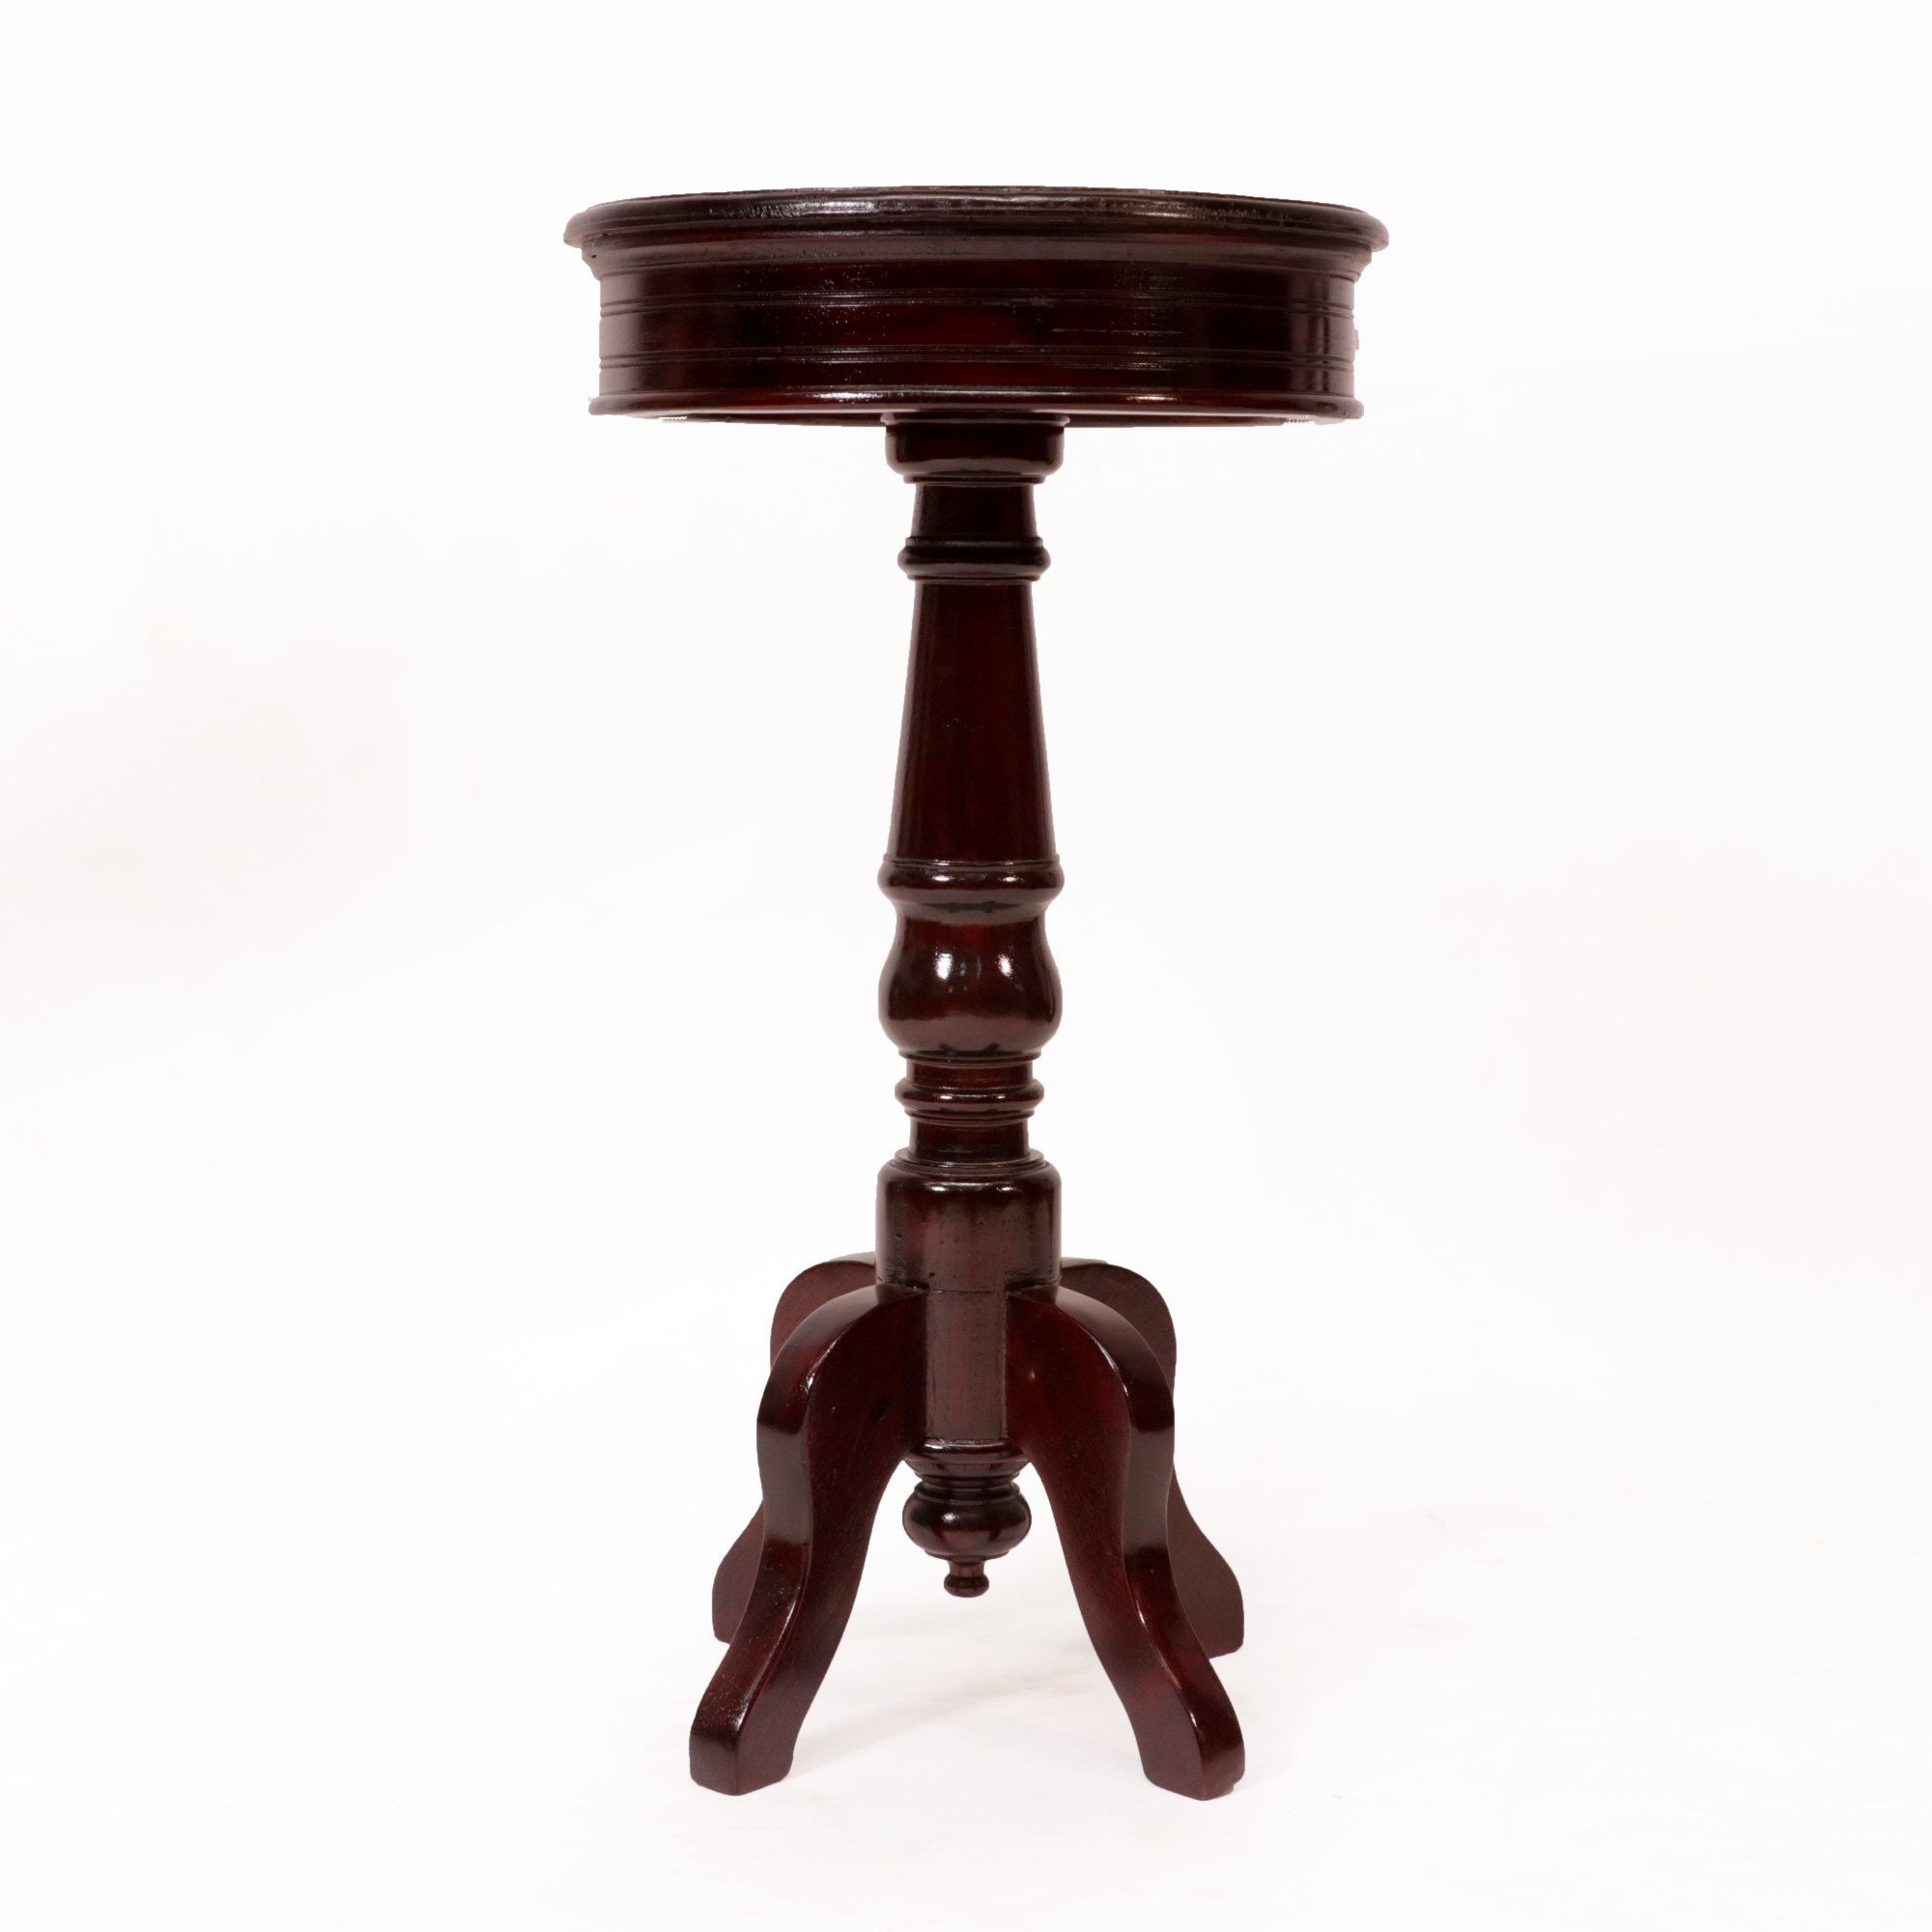 Compact Teak End Table (Small (16 x 16 x 29.5 Inch)) End Table